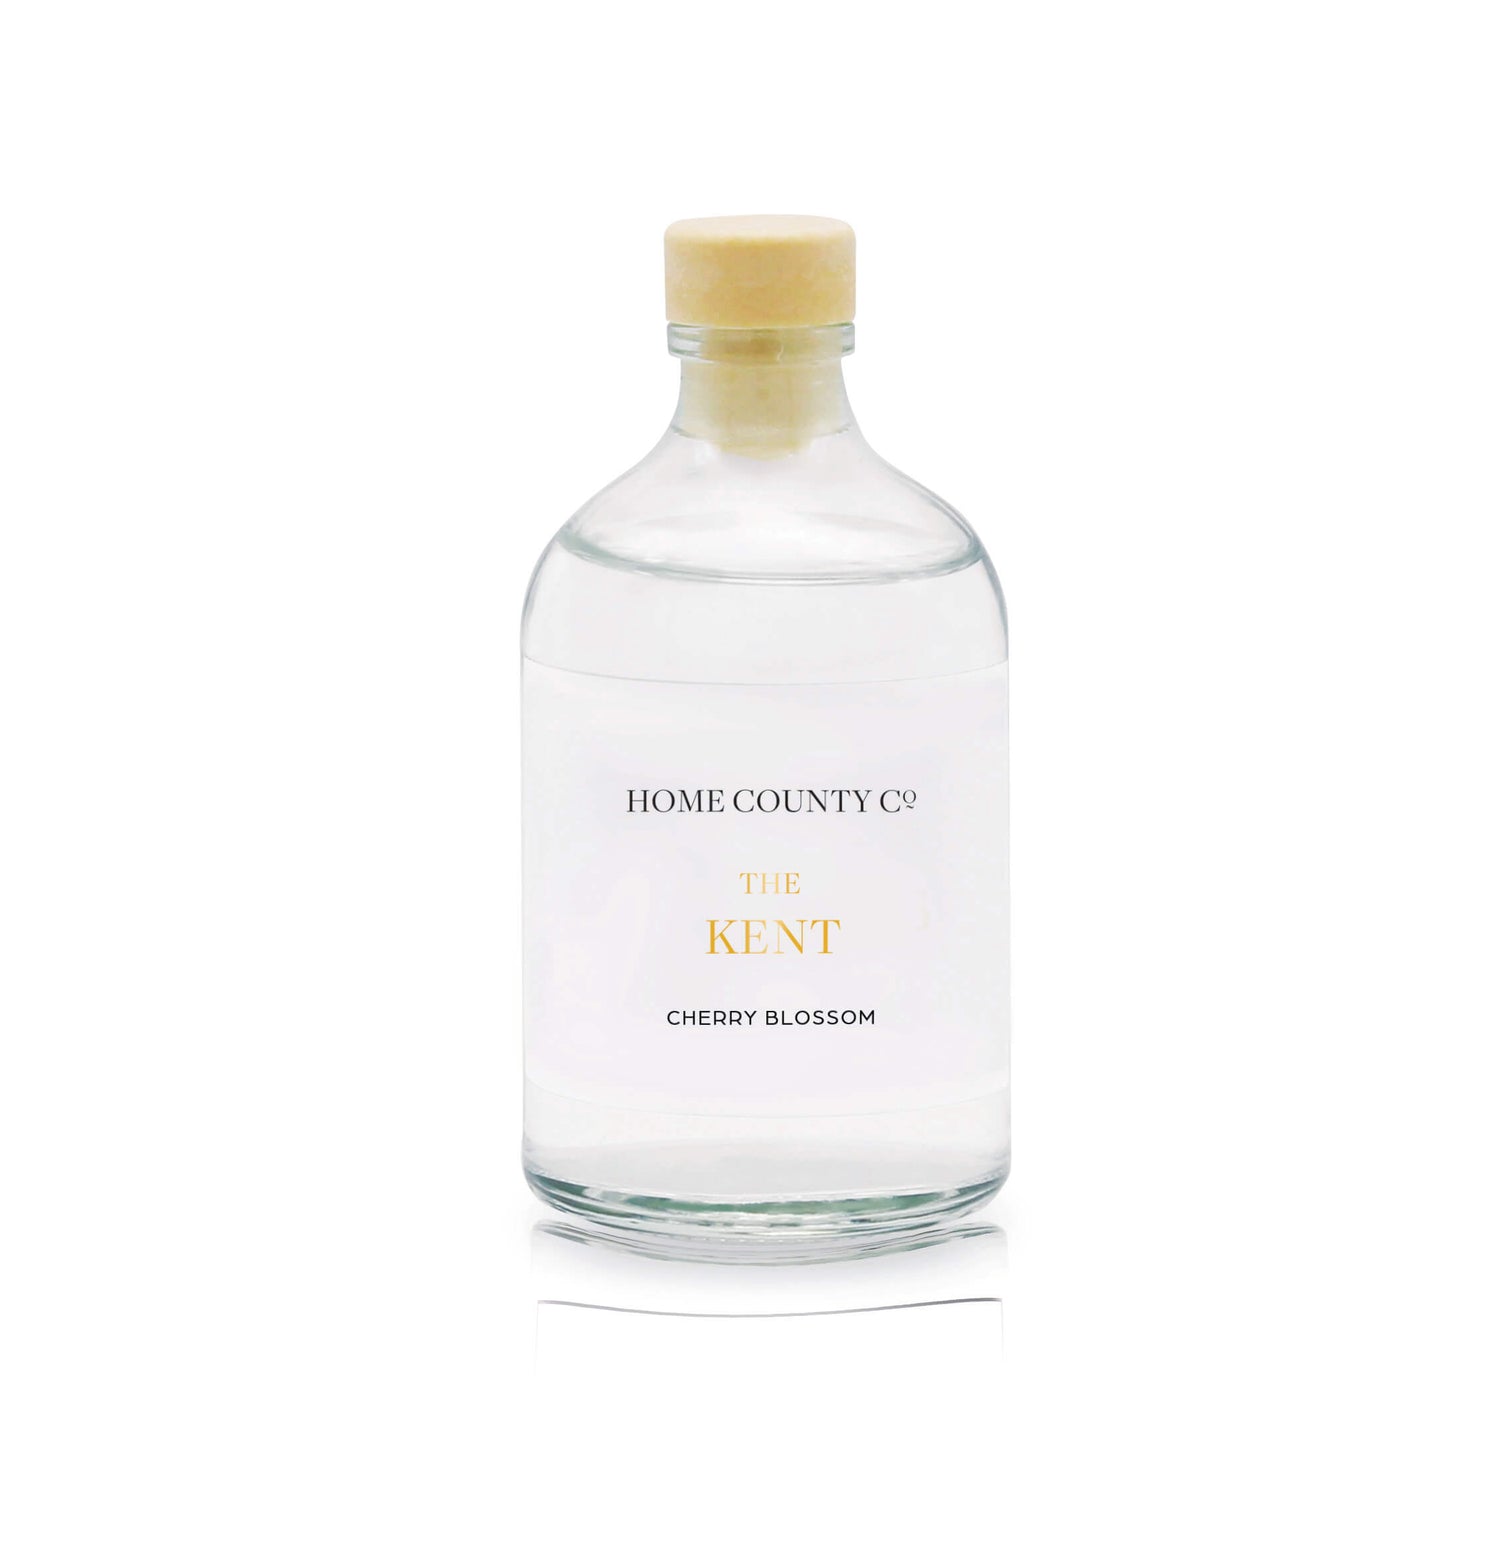 A cherry blossom reed diffuser refill is shown in a recyclable glass bottle